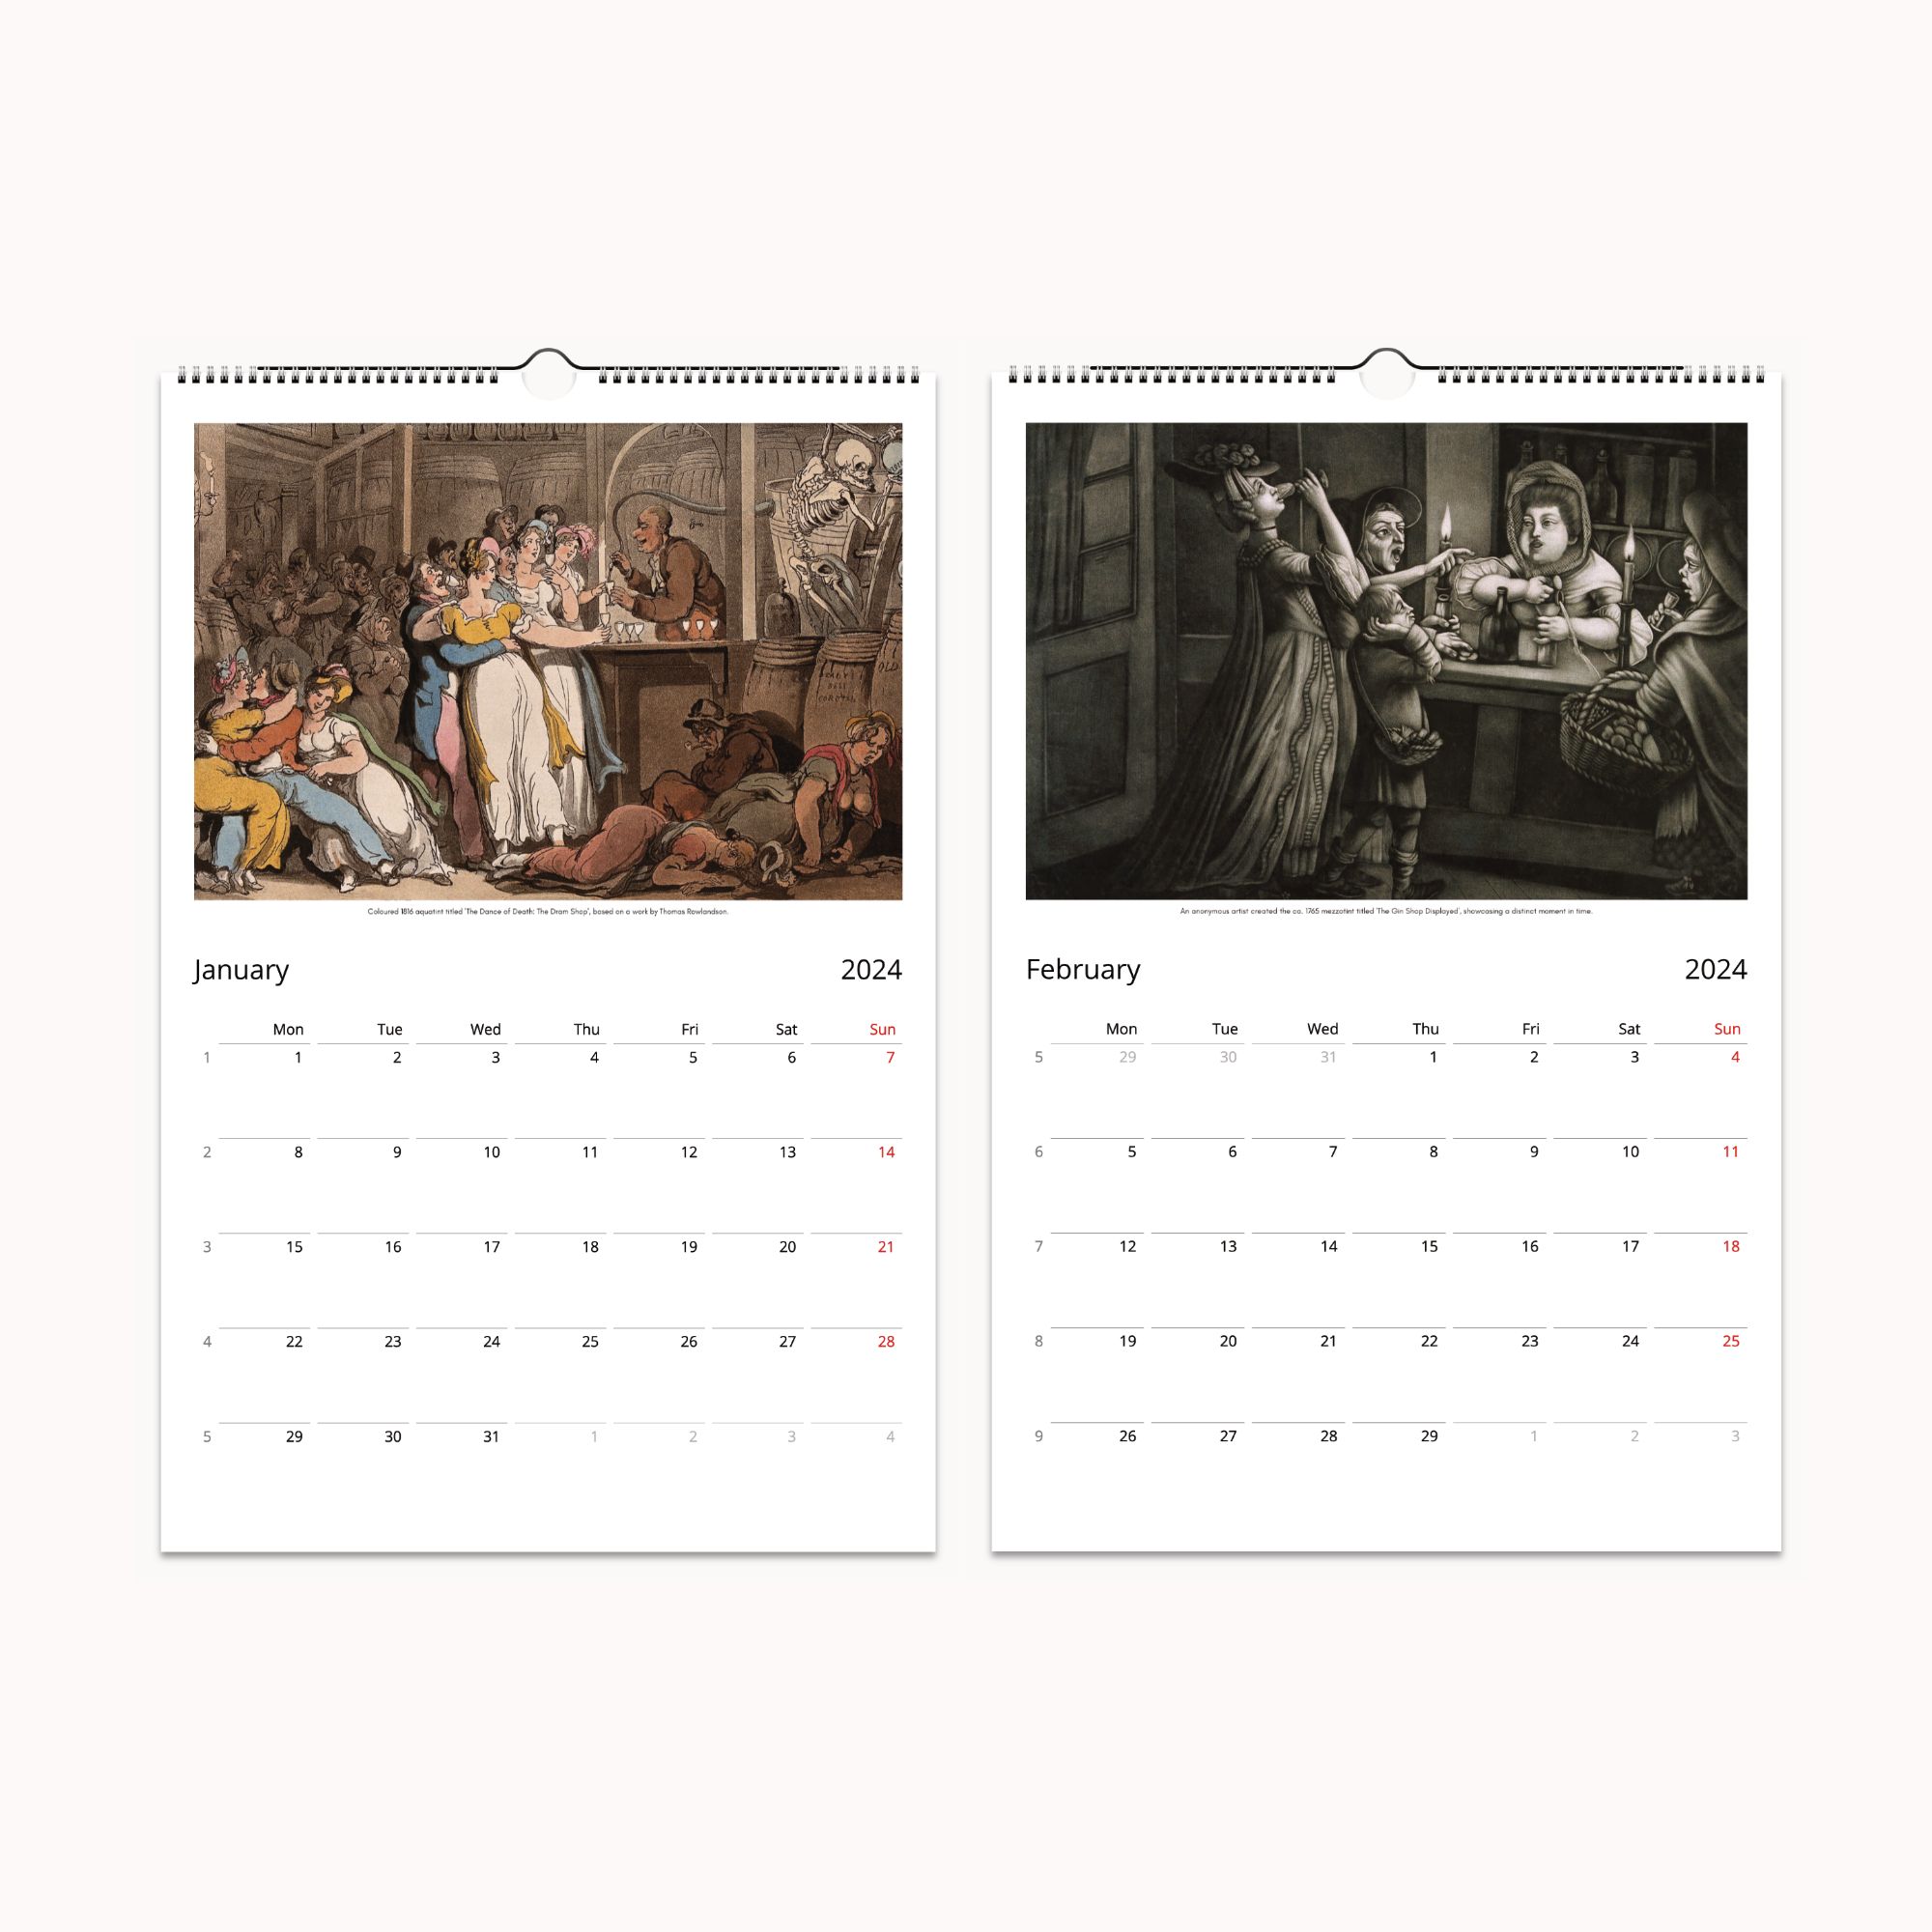 Artistic representation of England's gin history from 1700–1850, as featured in the 2024 Gin Chronicles Wall Calendar.